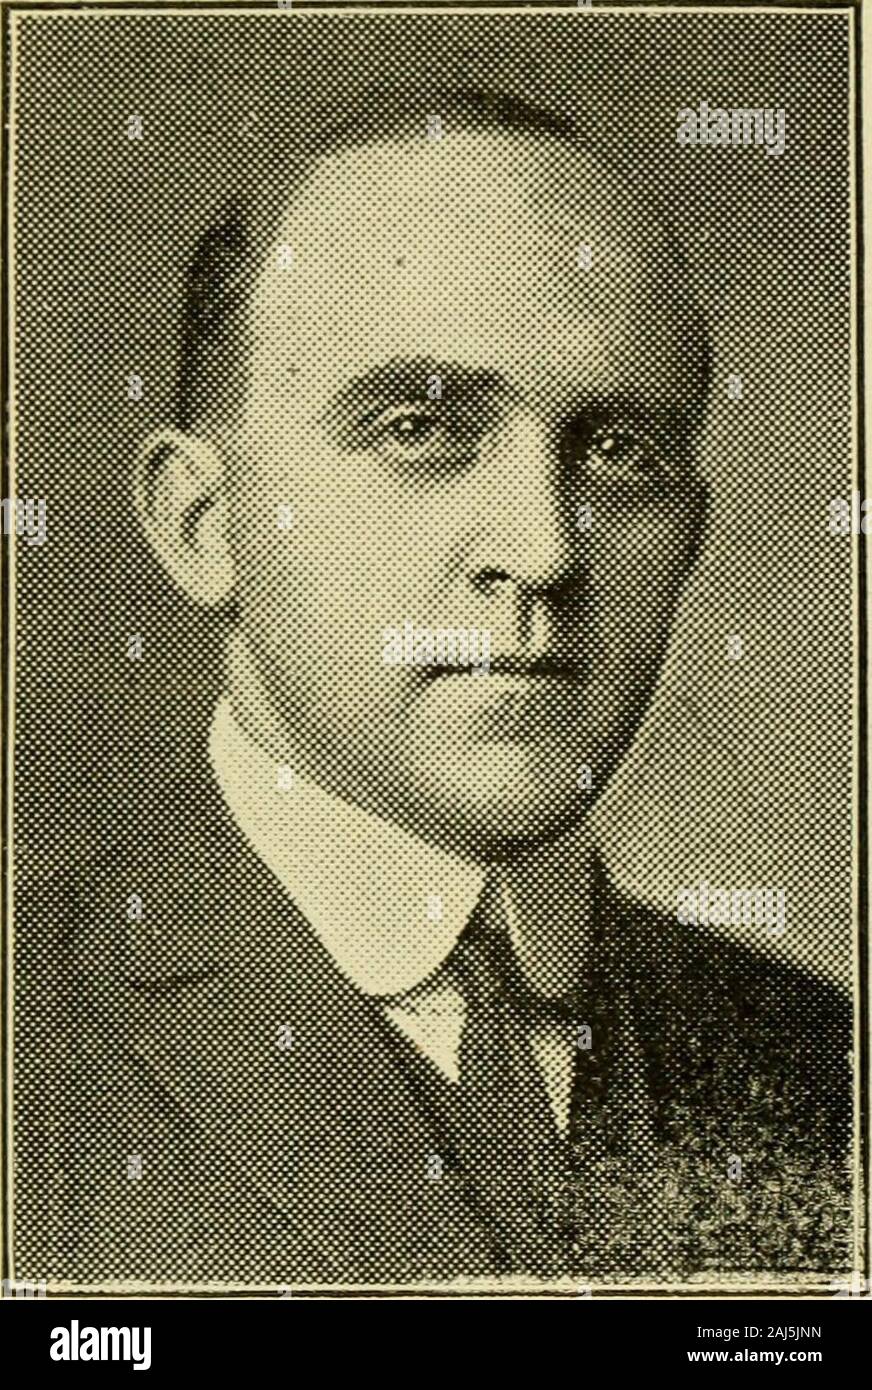 Public officials of Massachusetts . HARTSHORN, CHARLES H.. Gardner,2nd Worcester House District, Repubilcan. Born: Gardner, Feb. 11, 1859. Educated: Public Schools. Business: Baby Carriages and ReedChair Mnfr. Organizations: Masons 32d degree, I. O.O. F., R. A., Worcester Country Club,Nashua Country Club, Gardner Boat Club. Public office: Gardner Selectman 6years. Advisory Board 8 years. Moderator18 years; Mass. House 1916, 1917, 1918,1919, 1920. 178. HARVEY, BRAD DUDLEY, Haverhill,2d Essex House District, Republican. Born: Nottingham, N. H., May 6, 1888. Educated: Haverhill High School, Har-v Stock Photo